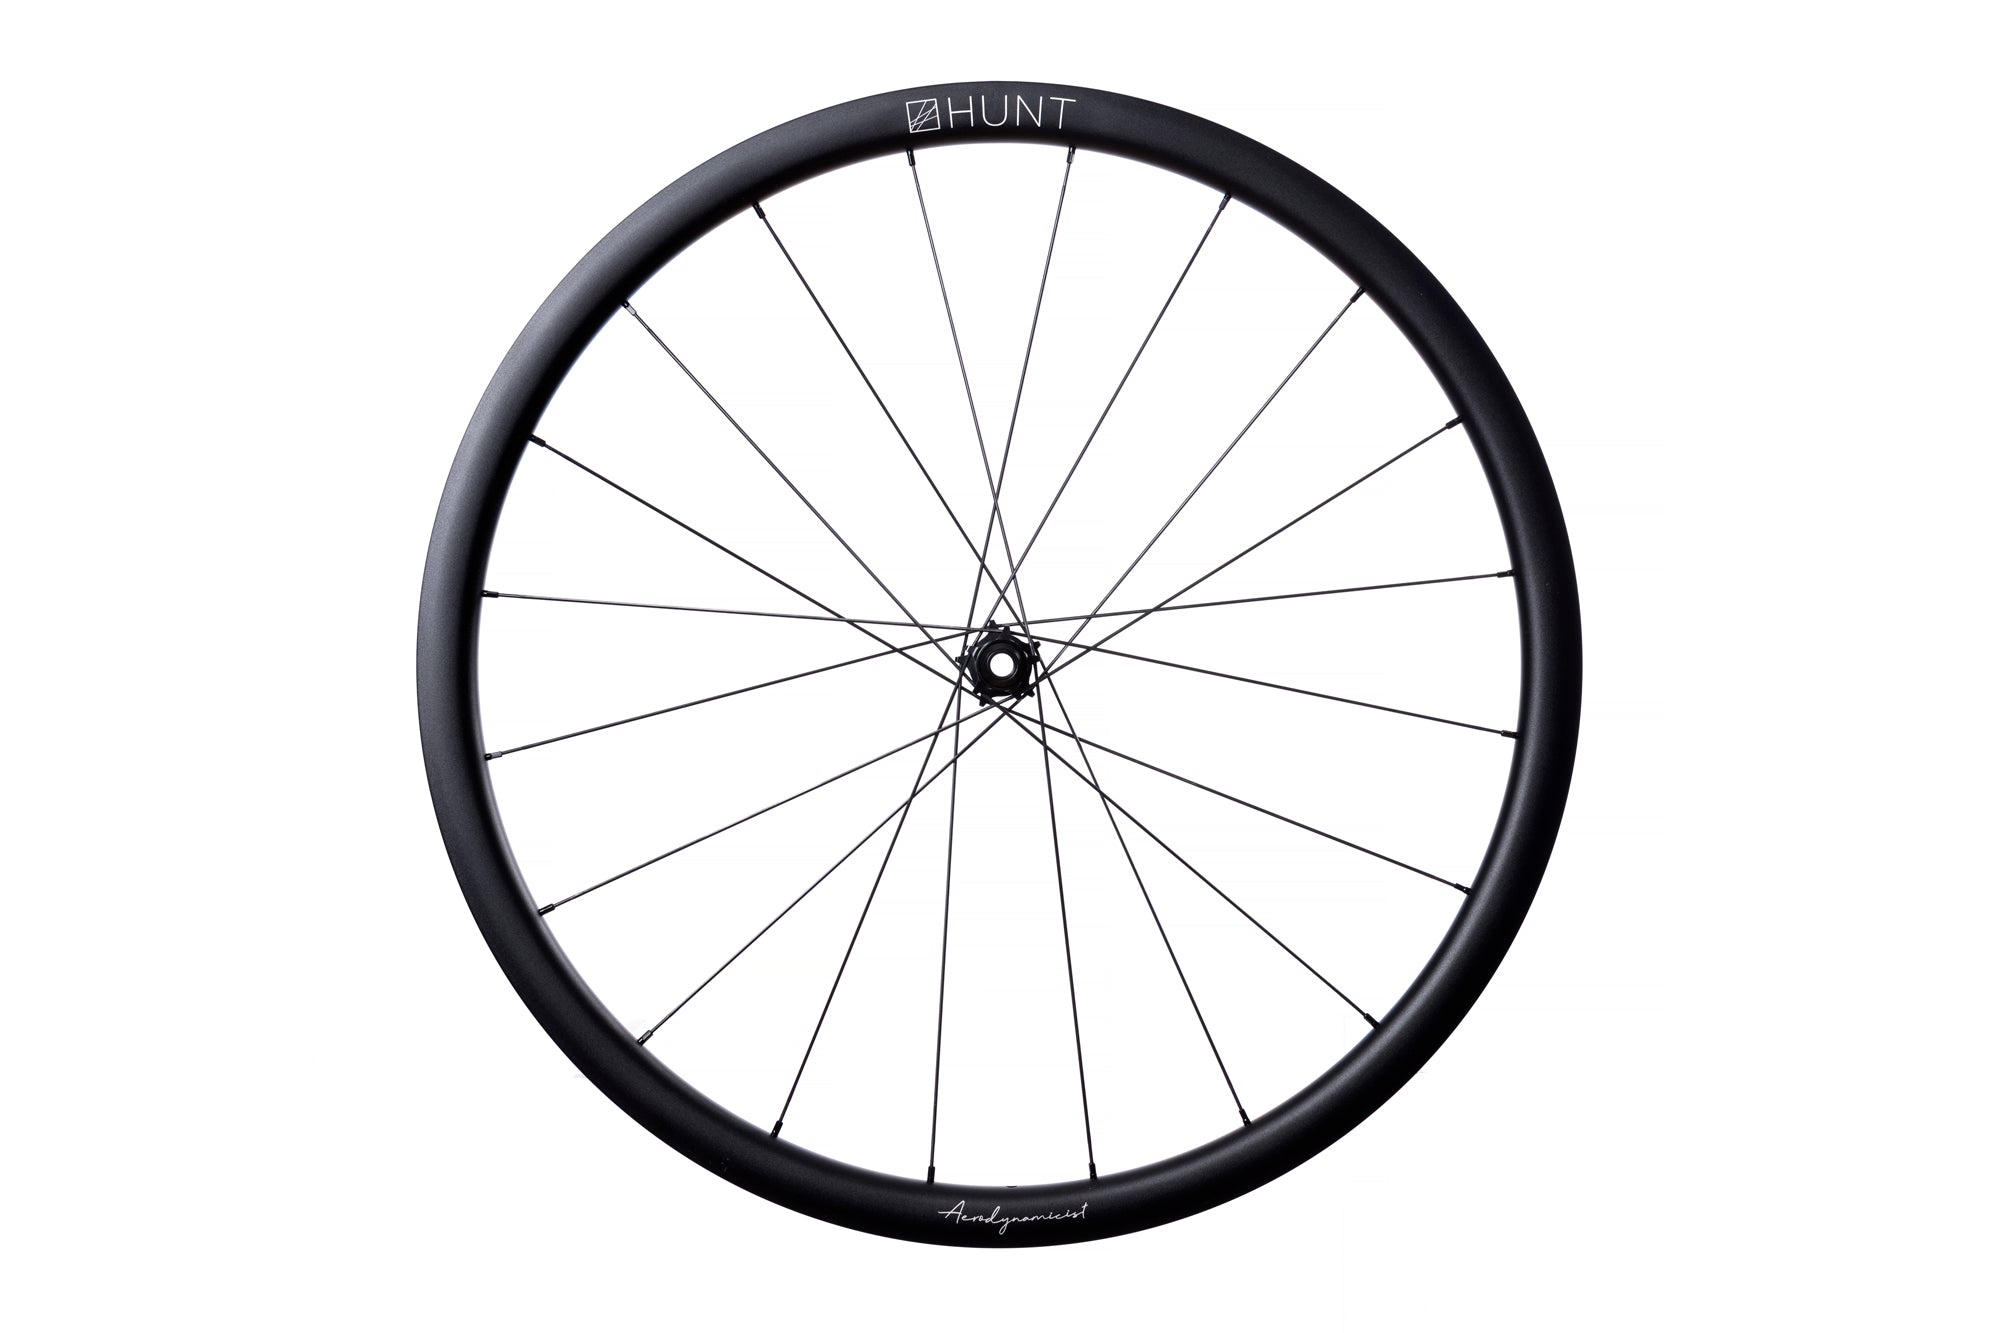 <h1>Rims</h1><i>The broad shape and large radius spoke bed profile (developed by HUNT's in-house engineering team for the LIMITLESS project allows excellent transfer of airflow from tire to the rim and then around the spoke bed to ensure low aerodynamic drag at a wide range of yaw angles.</i>